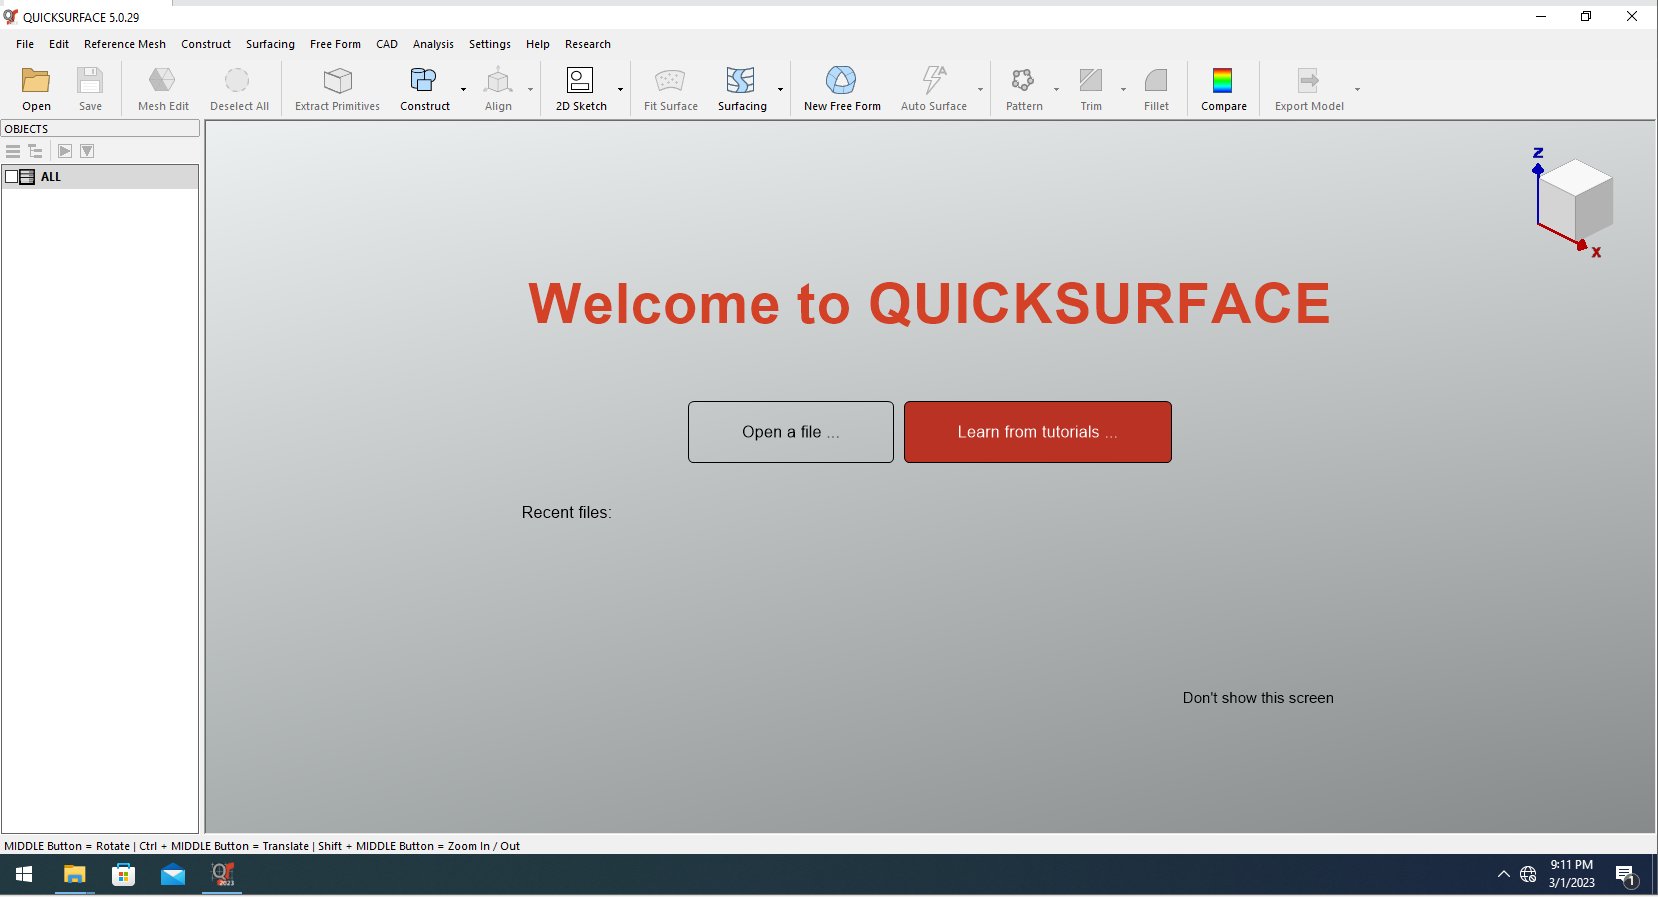 Working with QuickSurface 2023 v5.0.29 full license